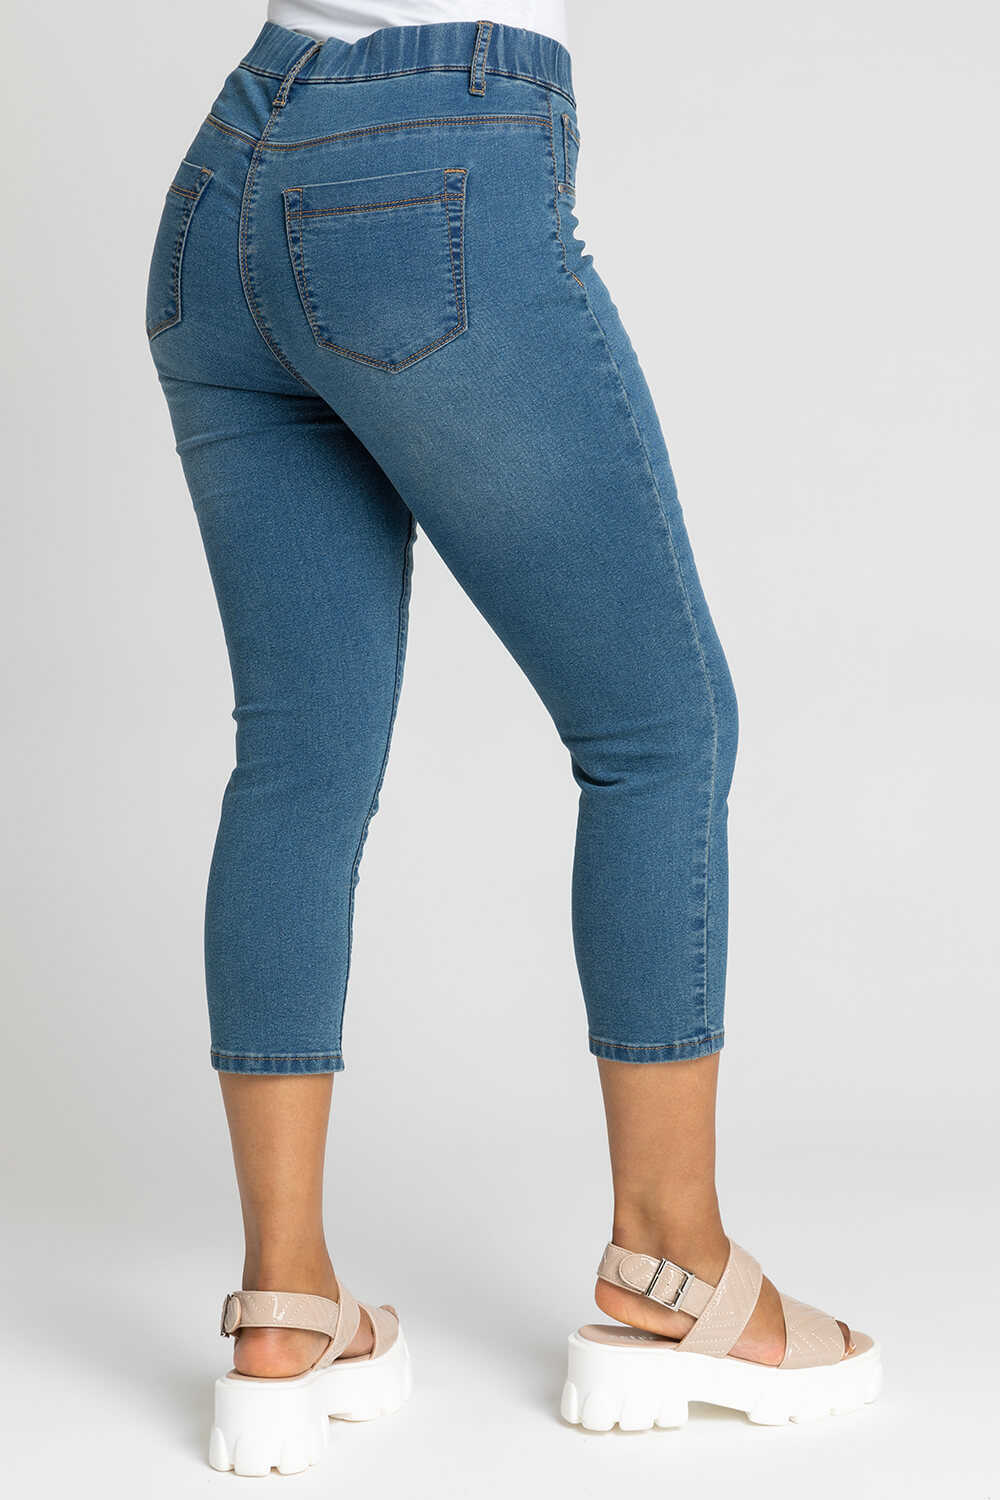 Talbots Jegging Crops - Colors